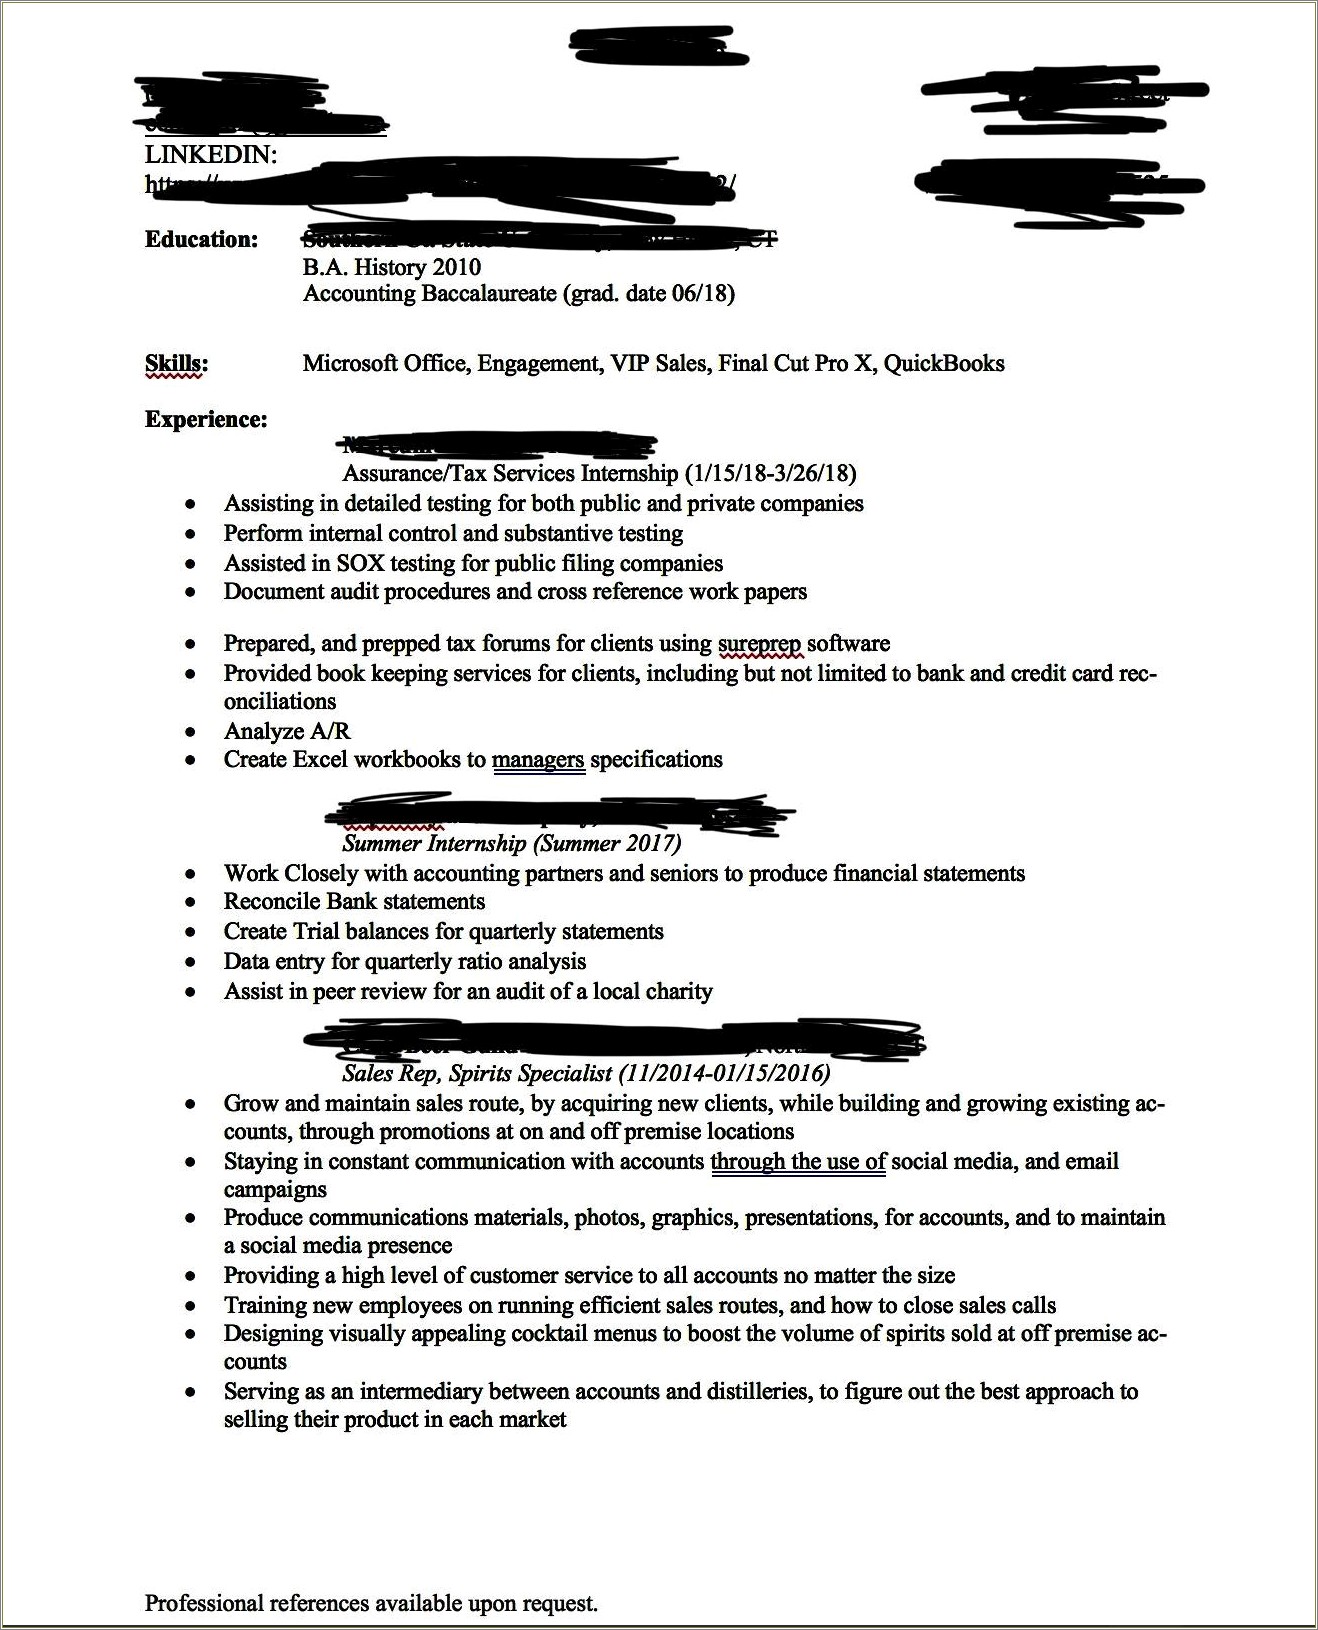 Only One Job On Resume Reddit Accounting